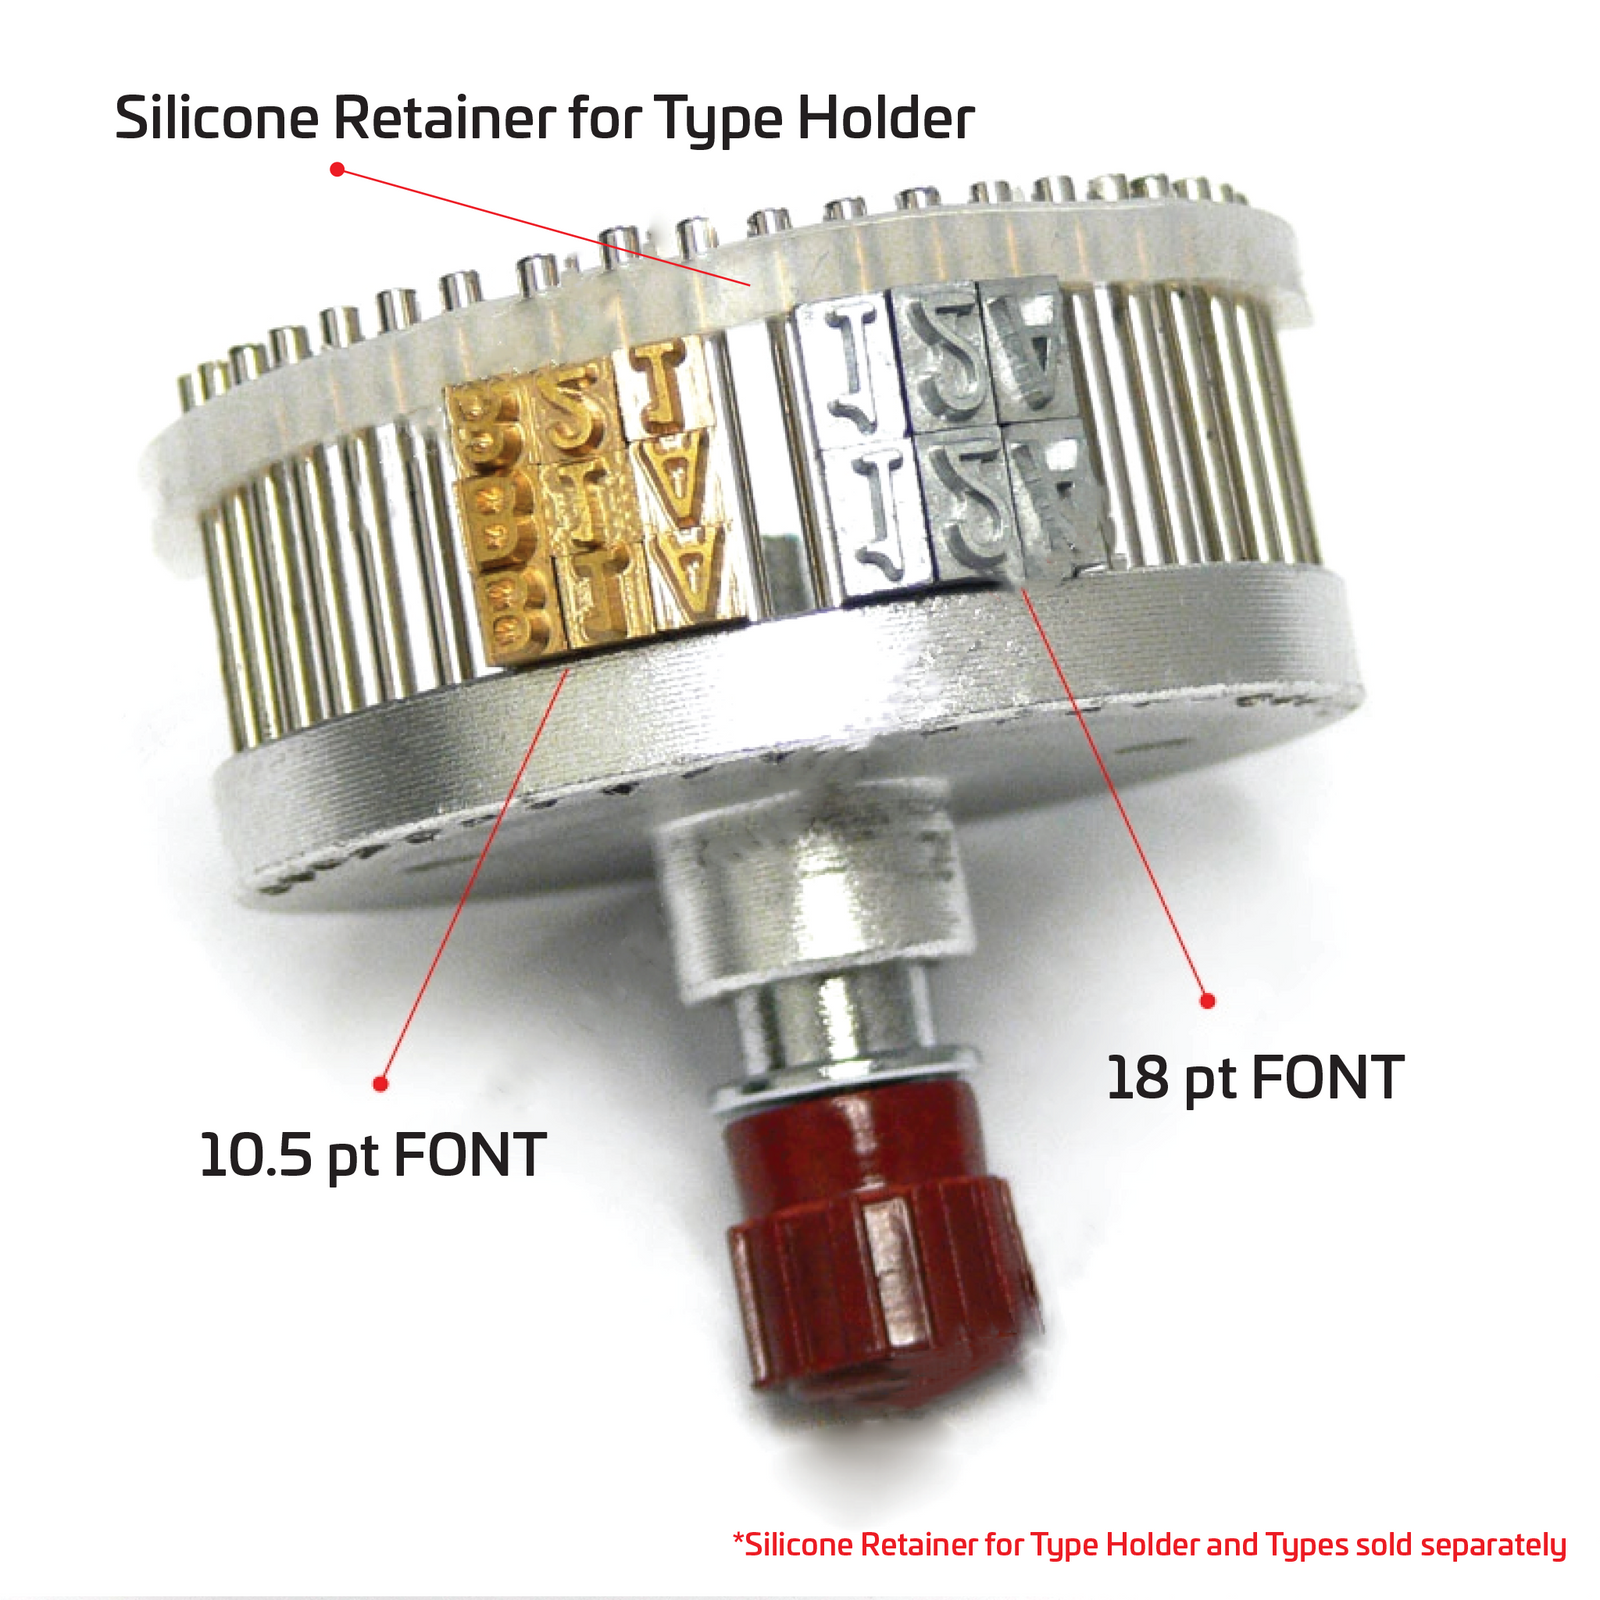 The type holder for hot ink roll printing and types that the JORES TECHNOLOGIES® continuous Band sealer with coder used. Text mentions and shows the size of fonts used are 10.5 pt and 18 pt. It is also shown where the silicone retainer for type holder is placed and it states that types and retainer are sold separately